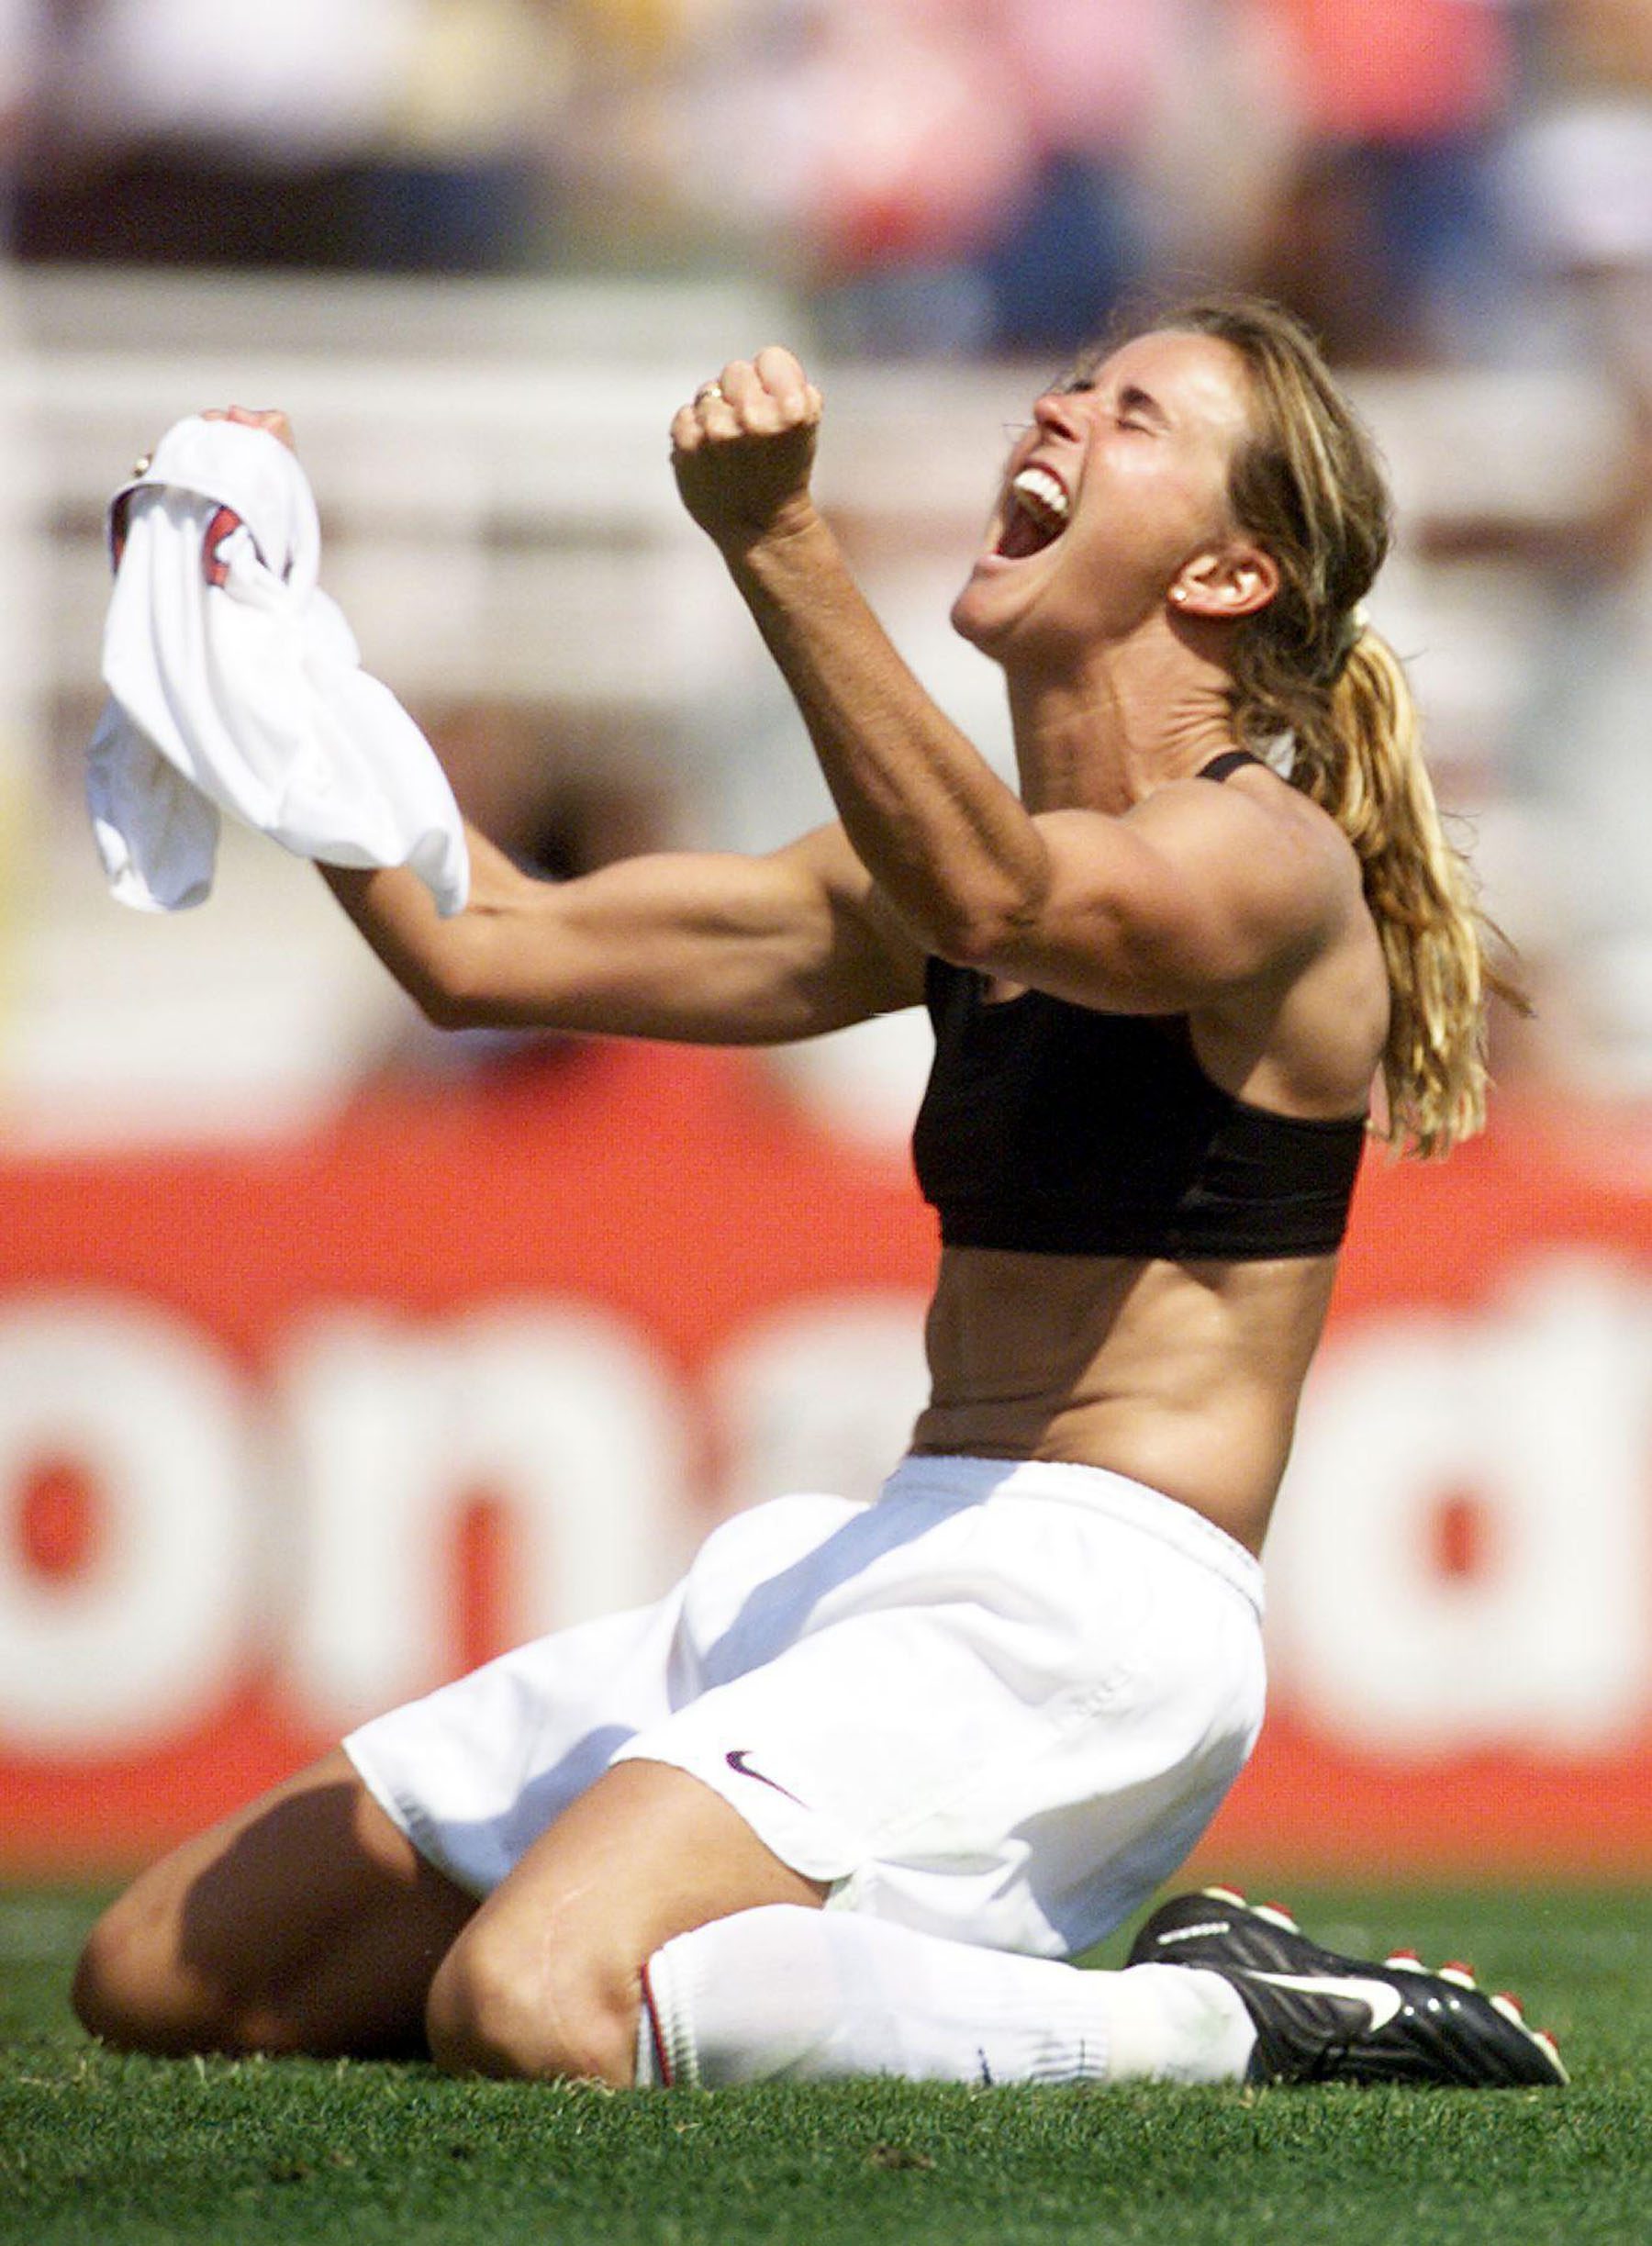 Brandi Chastain celebrates hitting the winning penalty kick against China in the World Cup final by waving her jersey in the air.